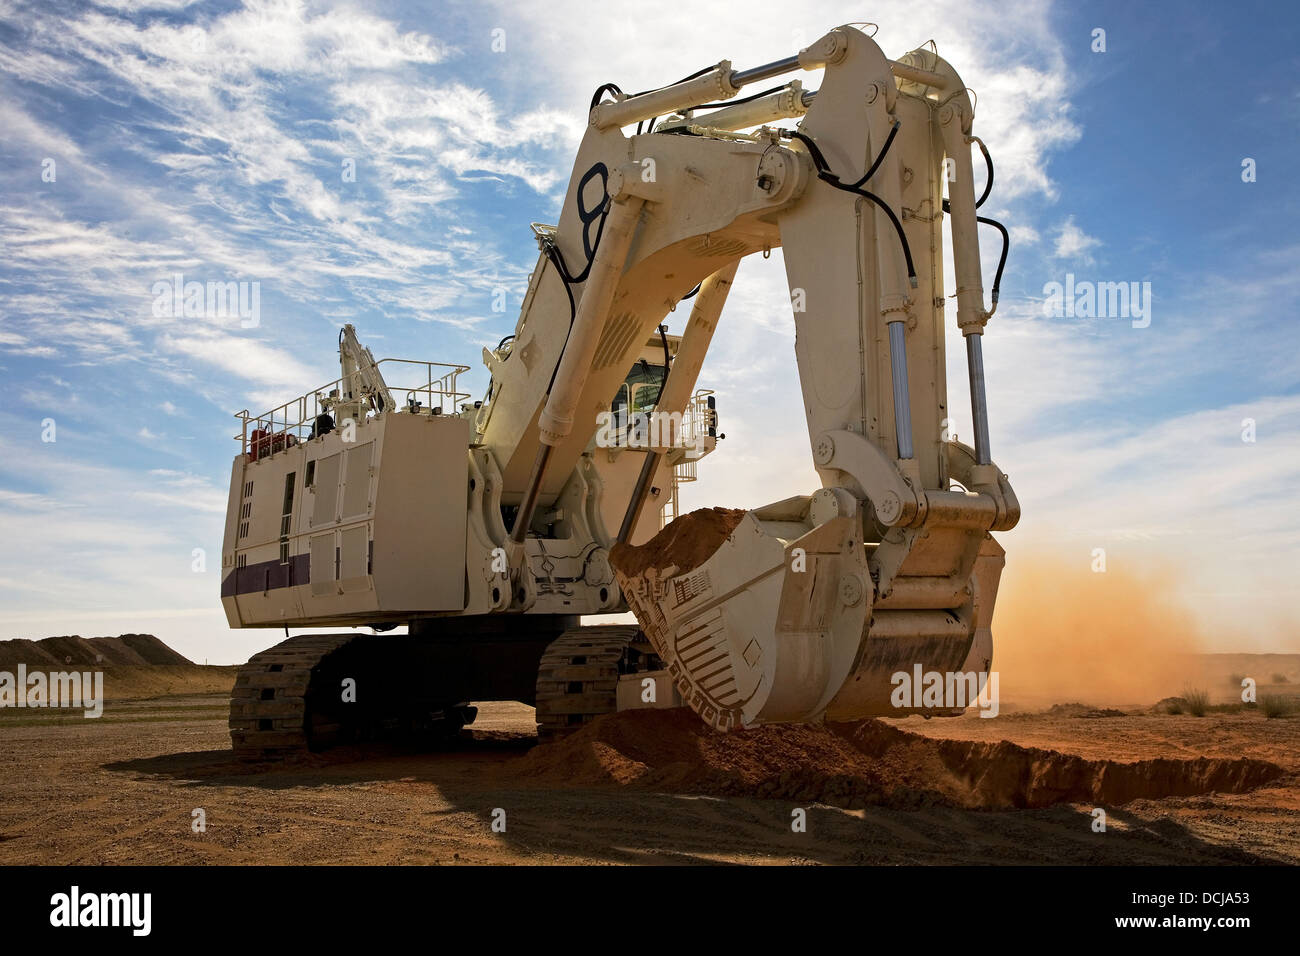 Bucyrus Caterpillar hydraulic excavator digger breaking new ground on a surface gold mining site in Mauritania, NW Africa Stock Photo